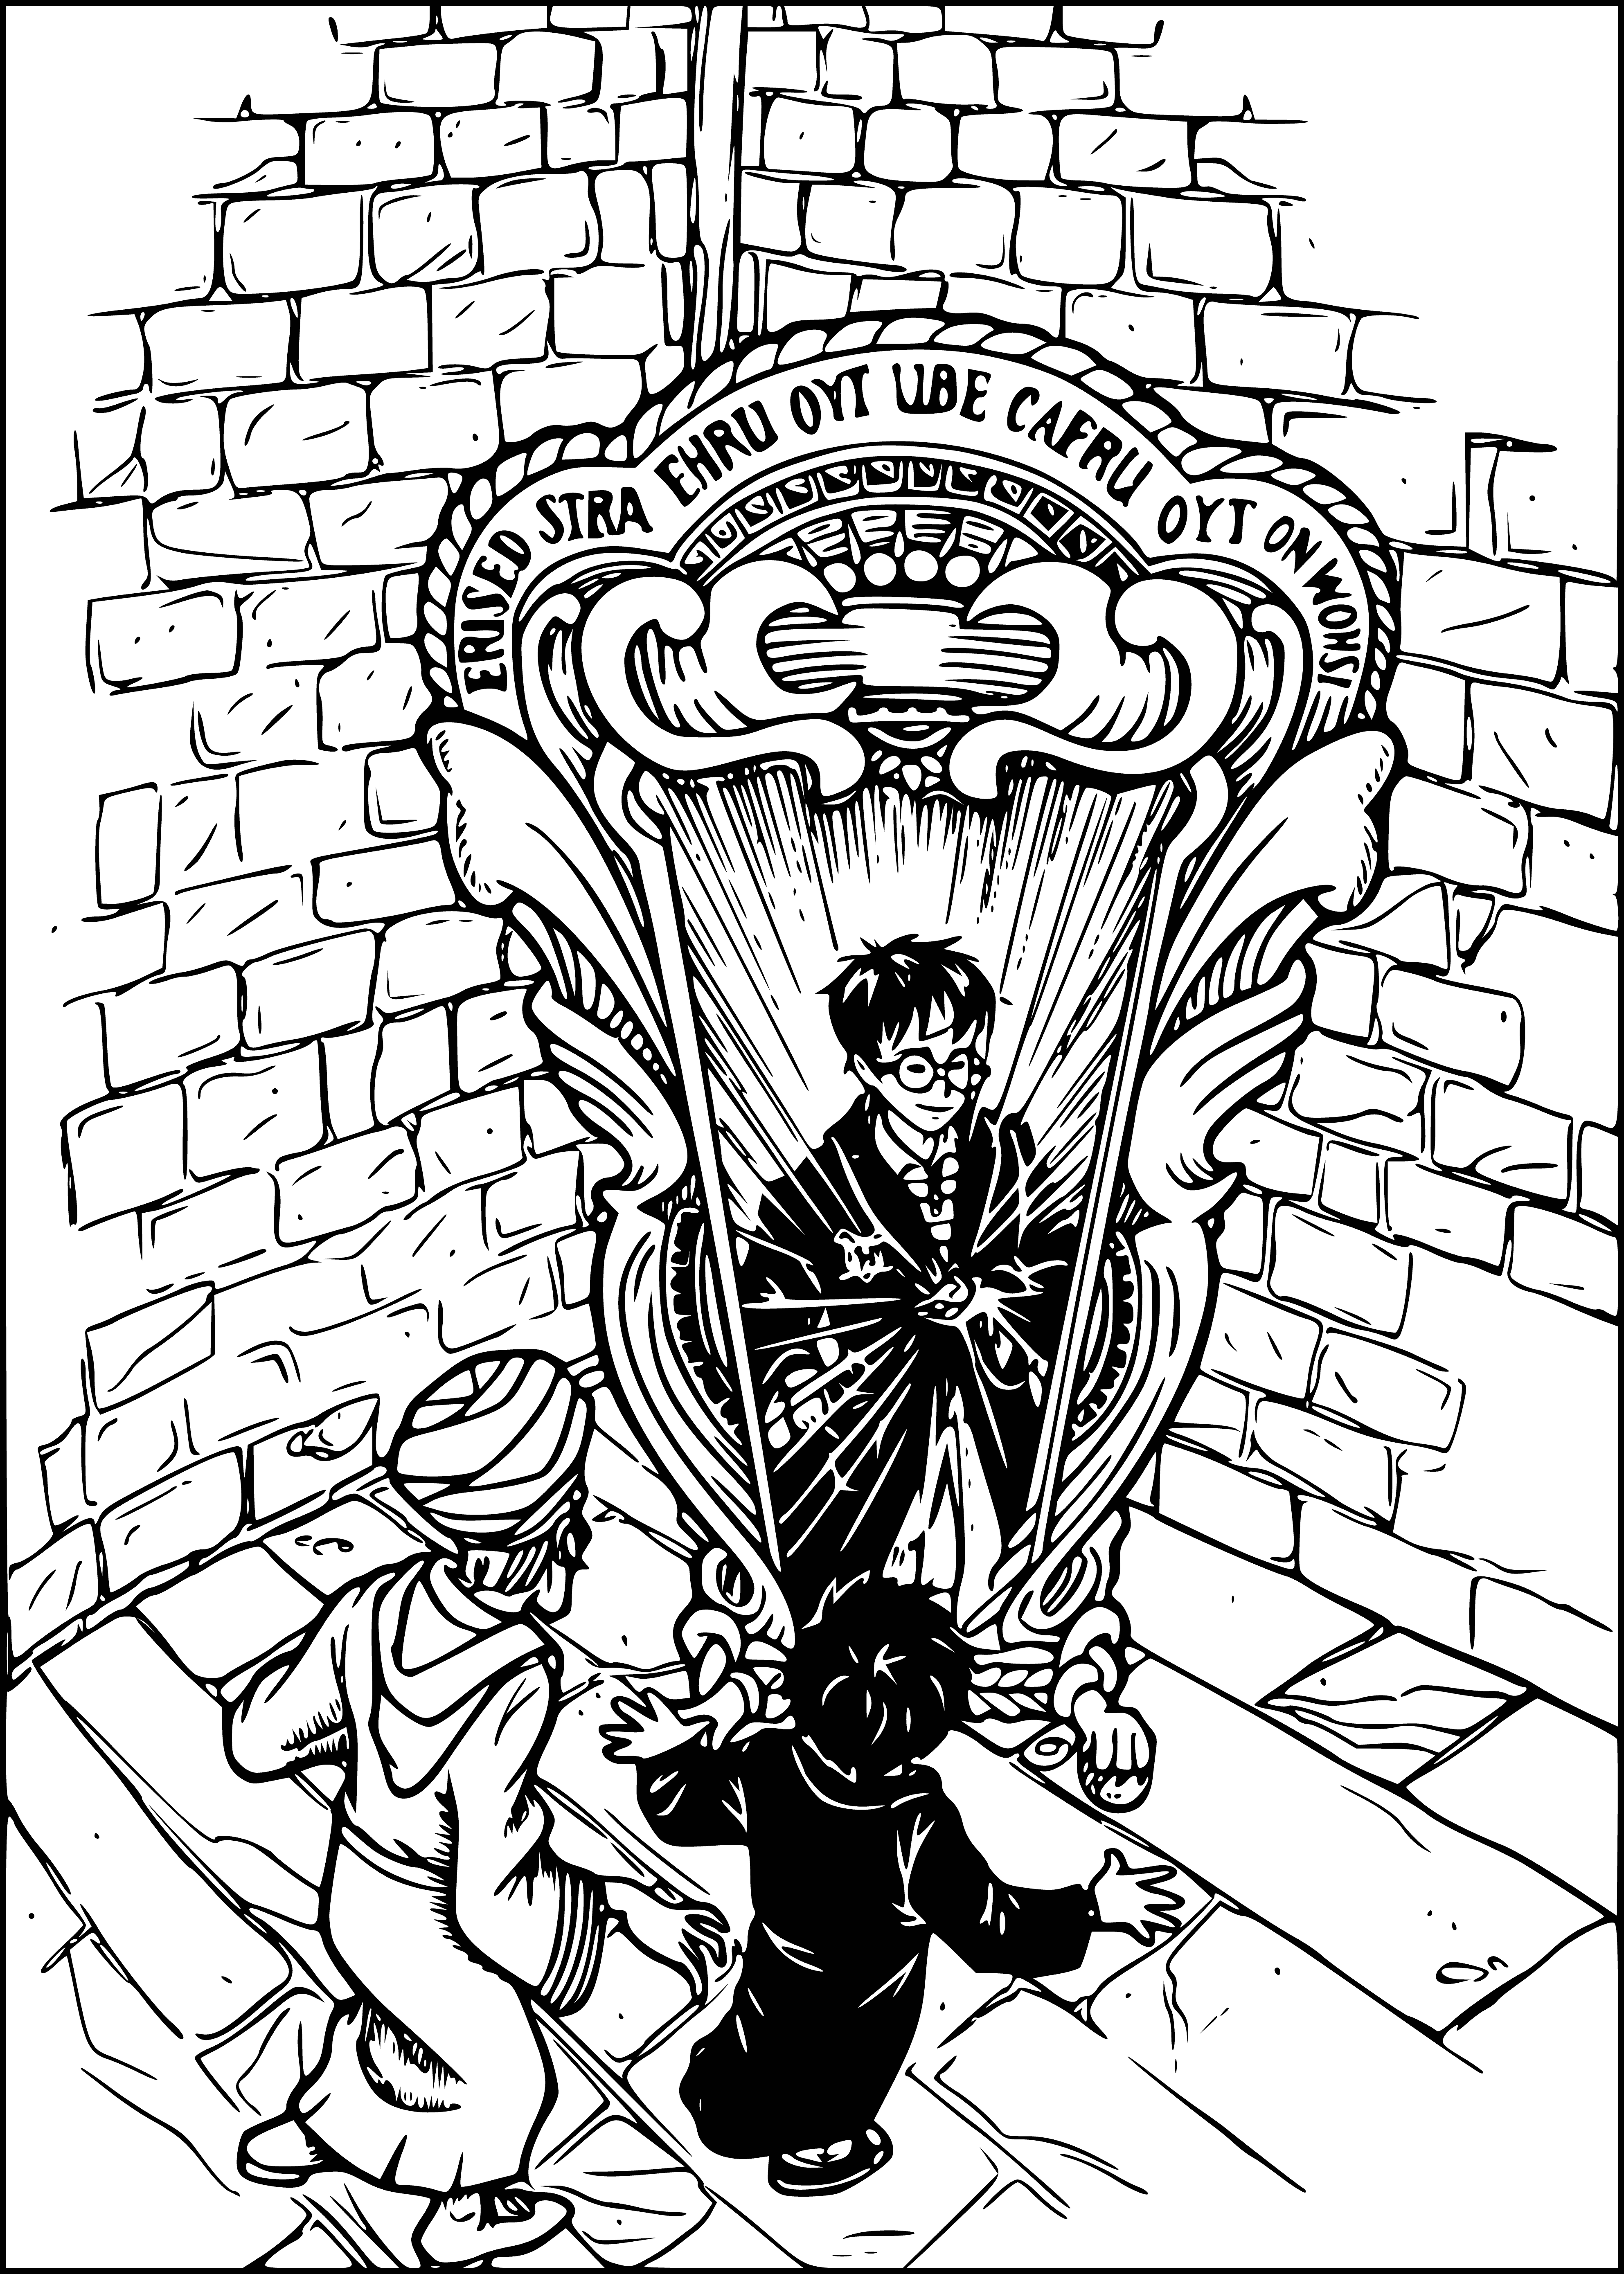 coloring page: Harry Potter: an 11-year-old with glasses, black hair & a robe w/silver badge, standing in front of a big stone building w/ a curved roof, lit from above.